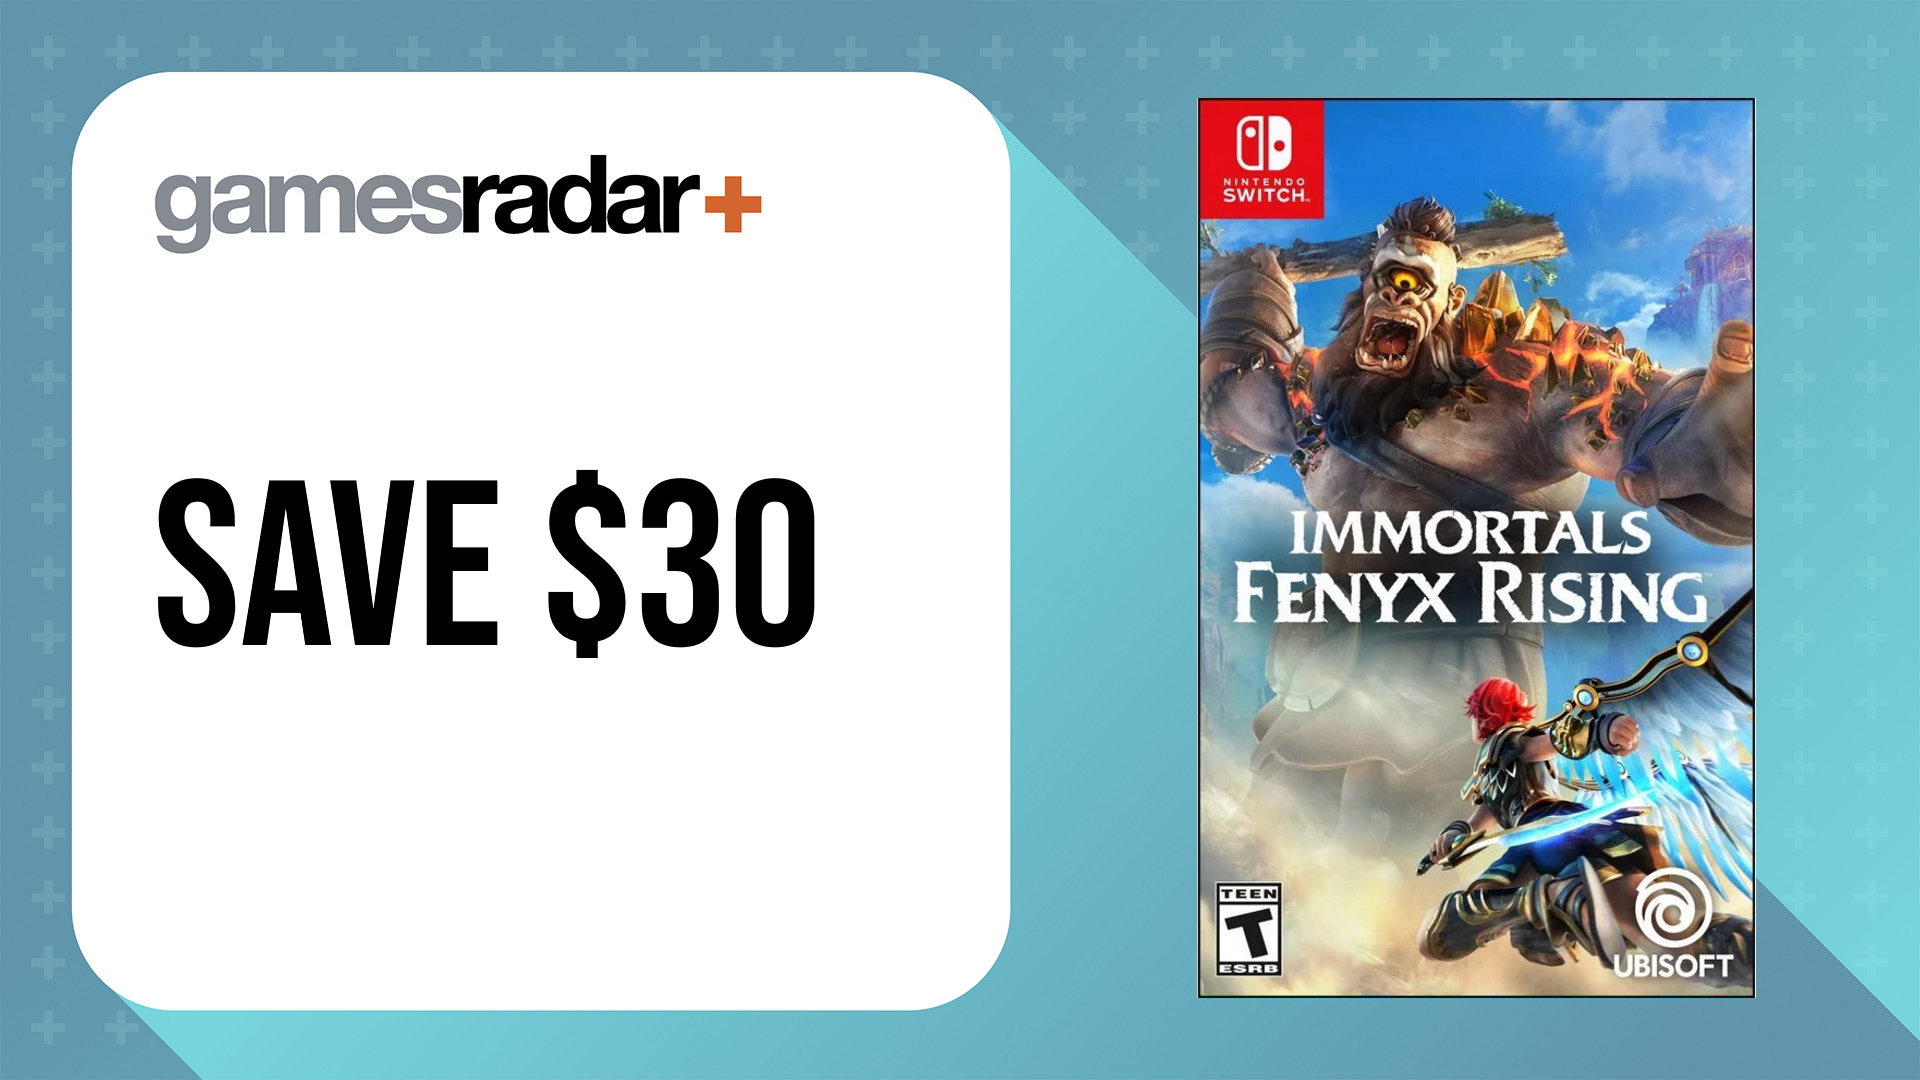 Immortals Fenyx Rising Nintendo Switch box art on a light blue background with sale details